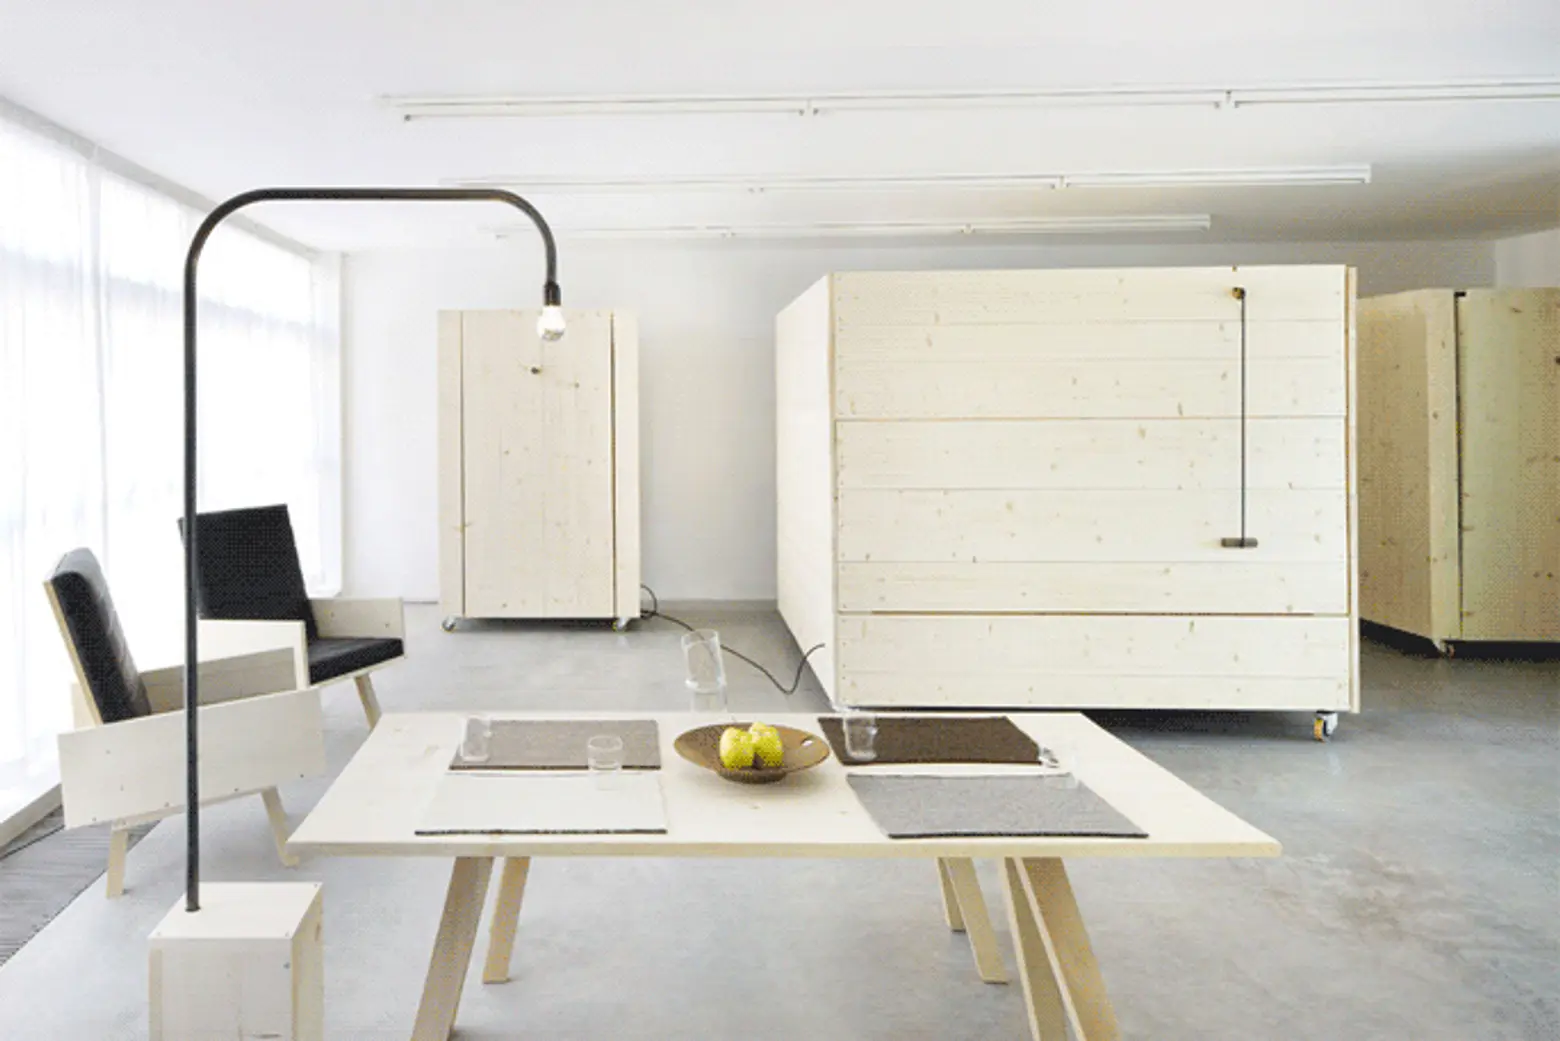 Atelierhouse: A Movable Murphy-Like Furniture System to Keep Your Room Ultra-Organized